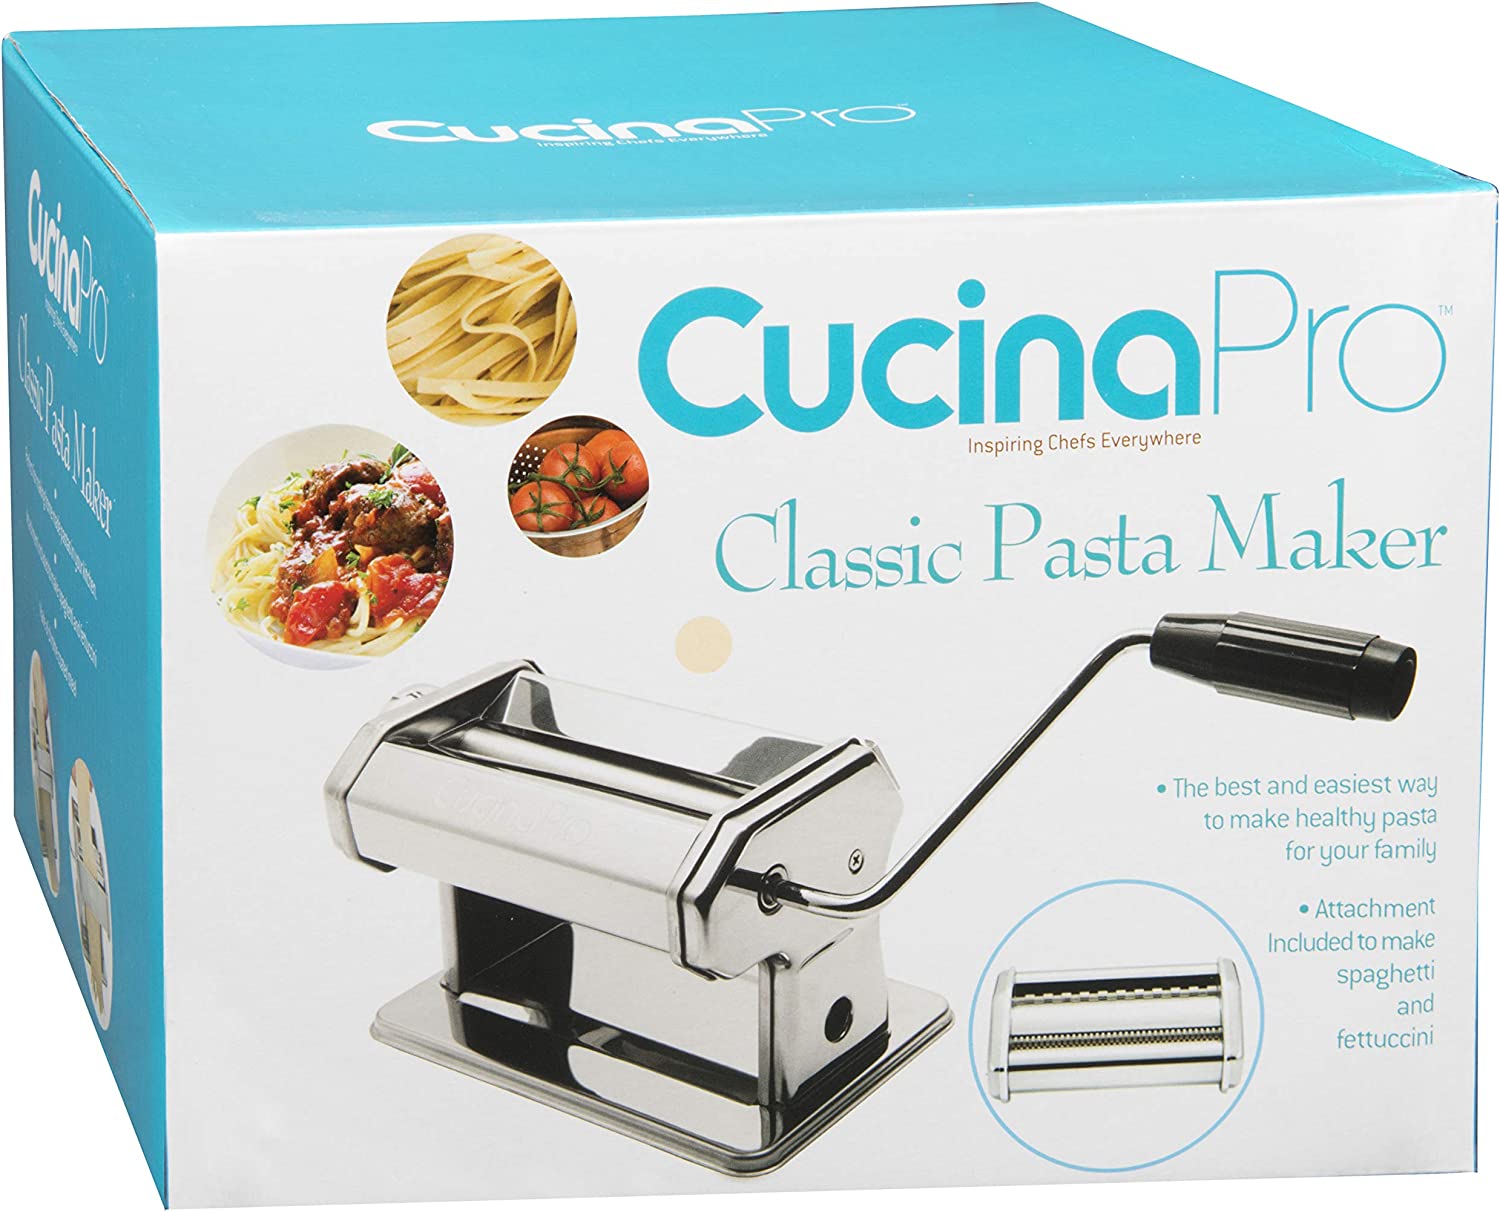 Pasta Maker Machine (177) By Cucina Pro - Heavy Duty Steel Construction - with Fettucine and Spaghetti attachment and Recipes - image 5 of 5